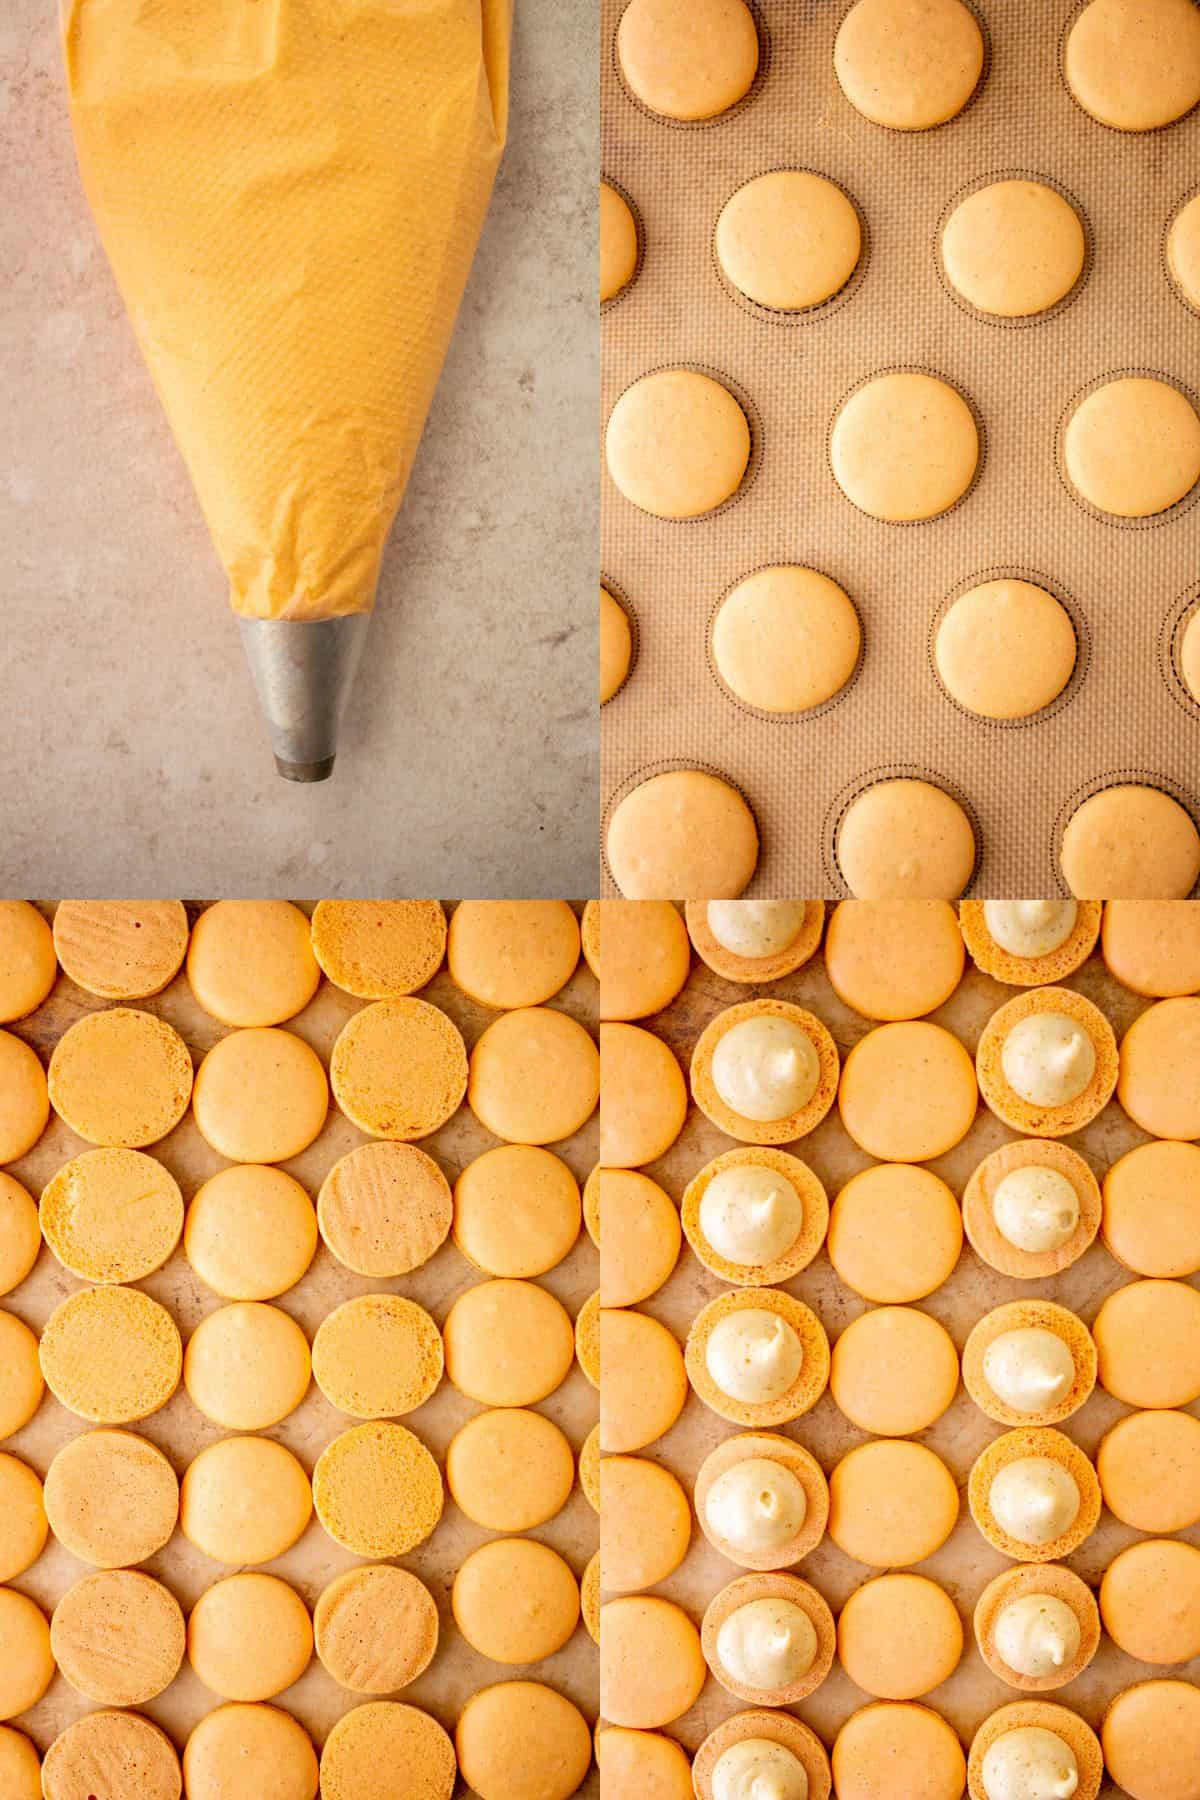 Macaron batter in piping bag, piped and baked macarons and macarons half with filling and half without